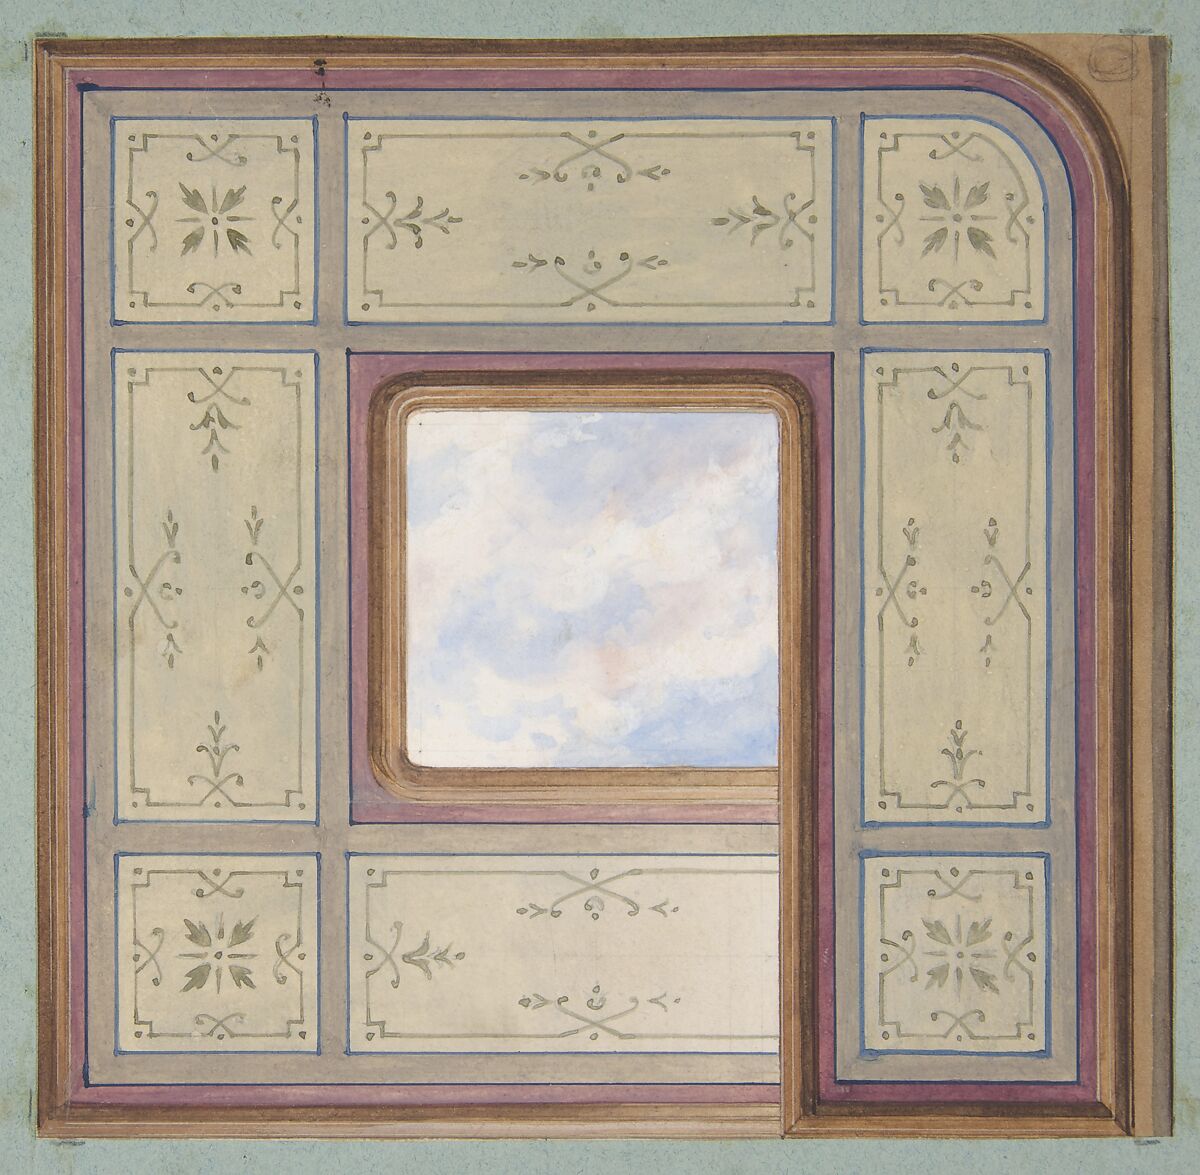 Design for the decoration of a ceiling with a central panel of painted clouds, Jules-Edmond-Charles Lachaise (French, died 1897), pen and ink, watercolor, and gouache over graphite on laid paper; mounted on blue wove paper 